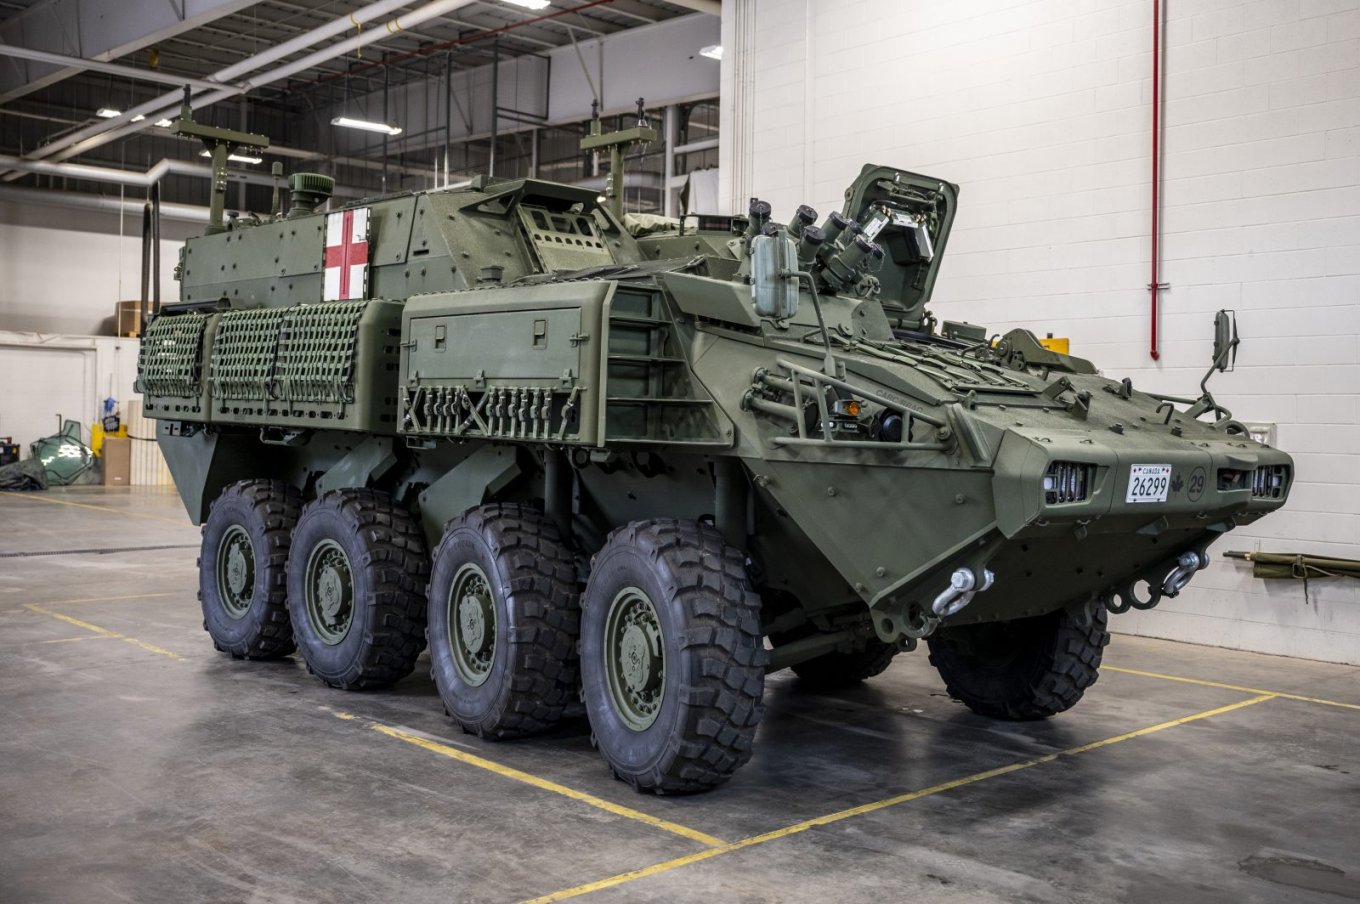 The ambulance variant of LAV 6 / Defense Express / Canada Announced Thousands of CRV7 Rockets and More LAV 6 Vehicles for Ukraine